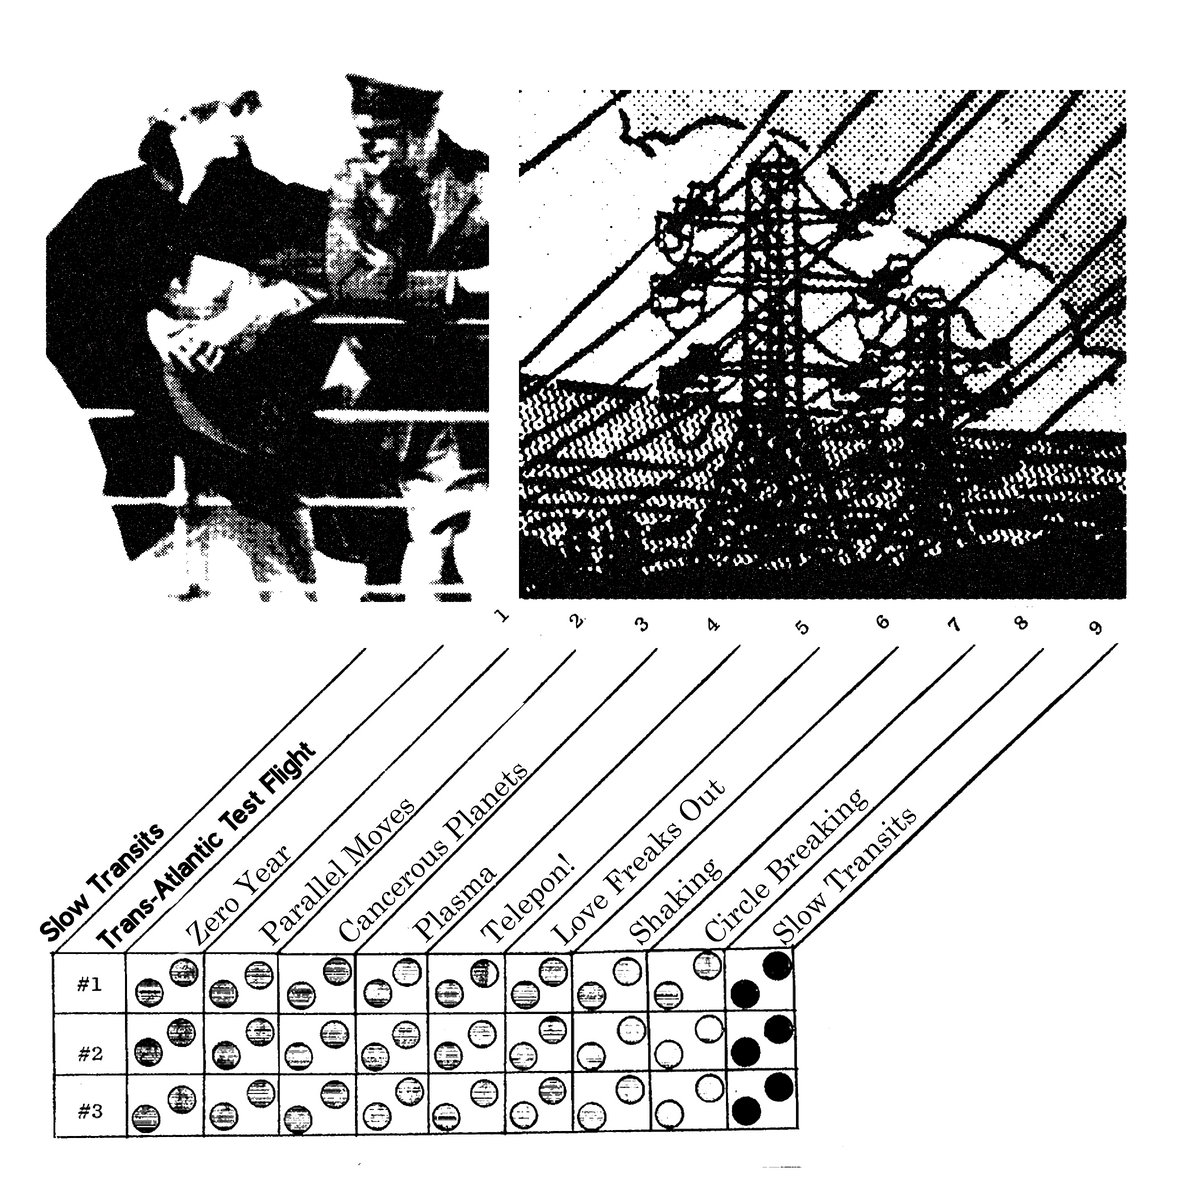 LP cover for Trans-Atlantic Test Flight. depicts a man chatting to a woman on a ship, some powerlines and the album tracklist